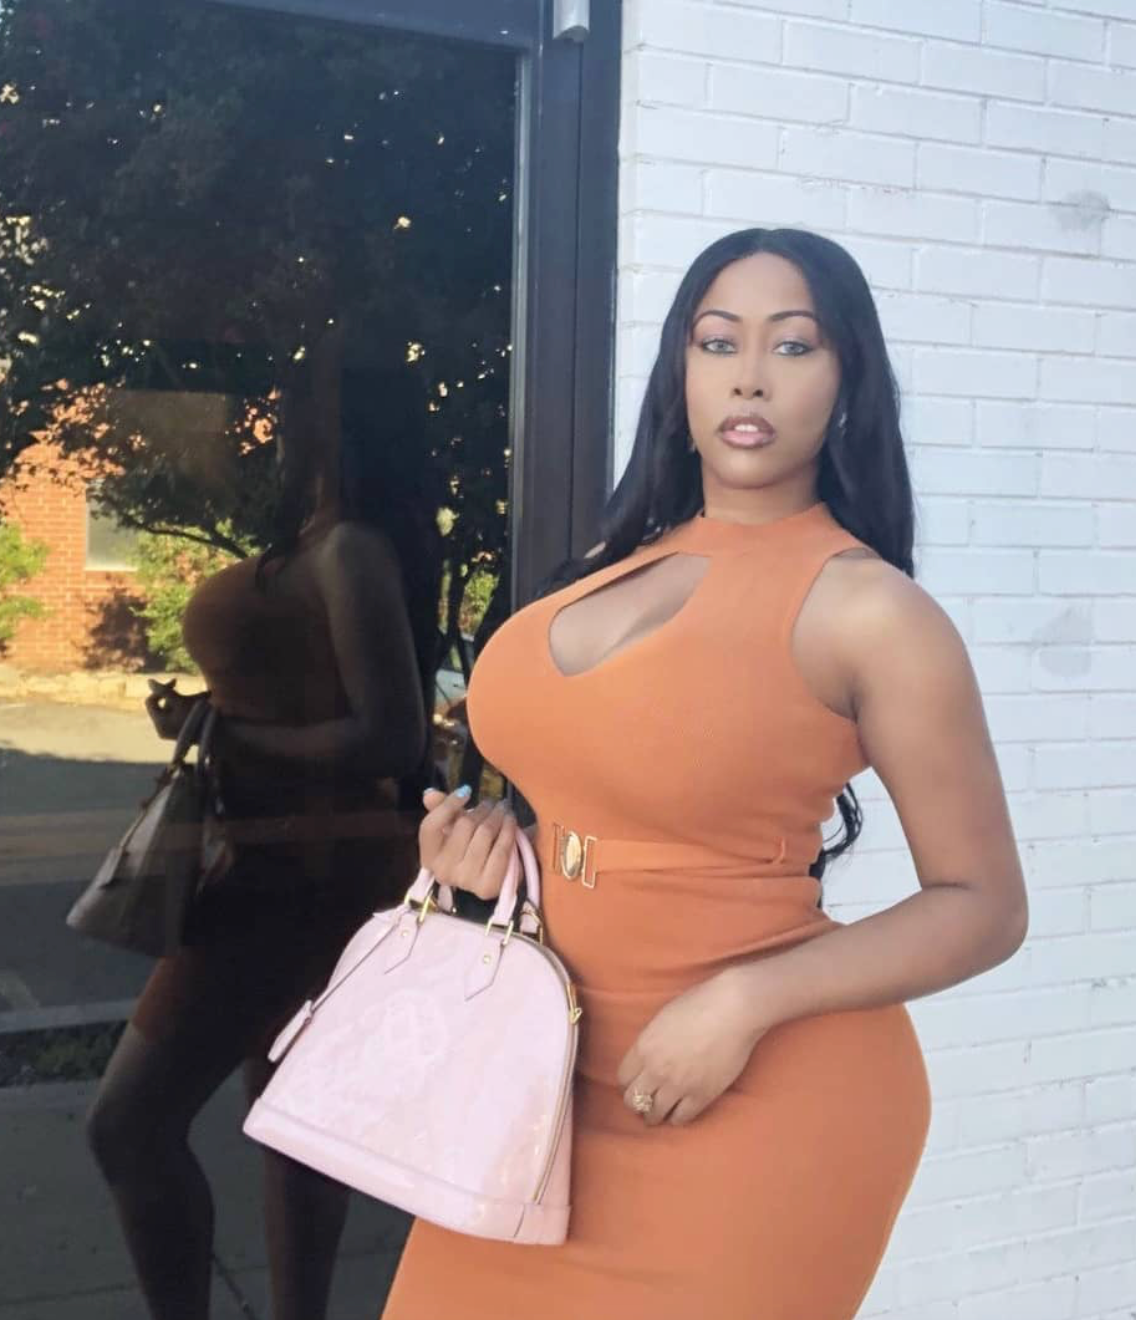 Porn star Moriah Mills goes after Zion Williamson again in Twitter